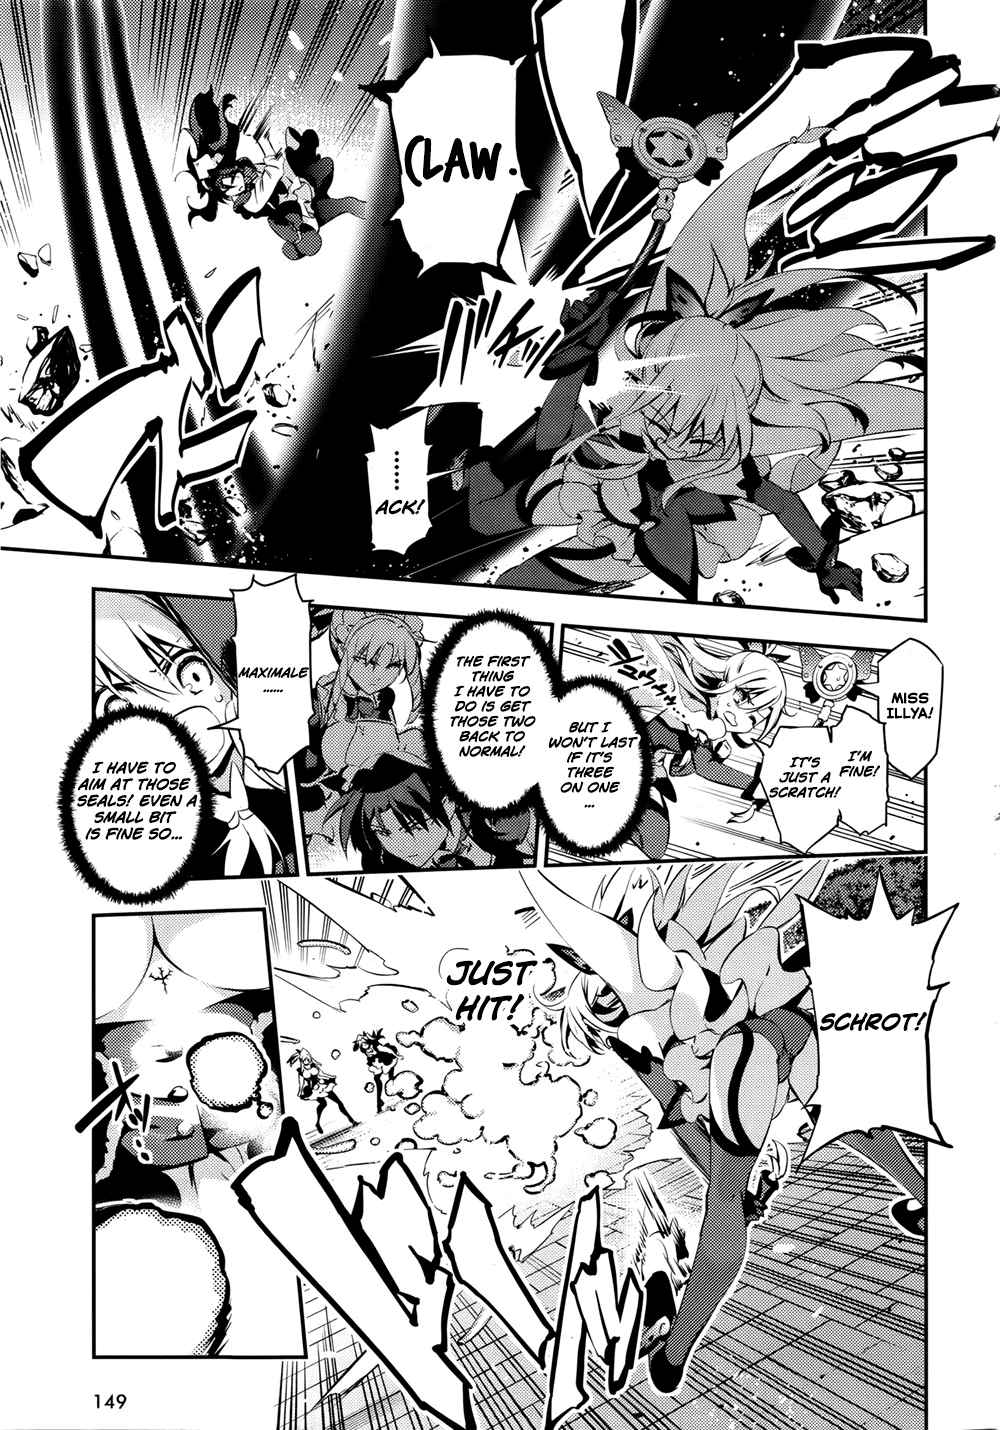 Fate/kaleid liner PRISMA☆ILLYA 3rei!! Vol. 4 Ch. 17 The Foreseen Eternity